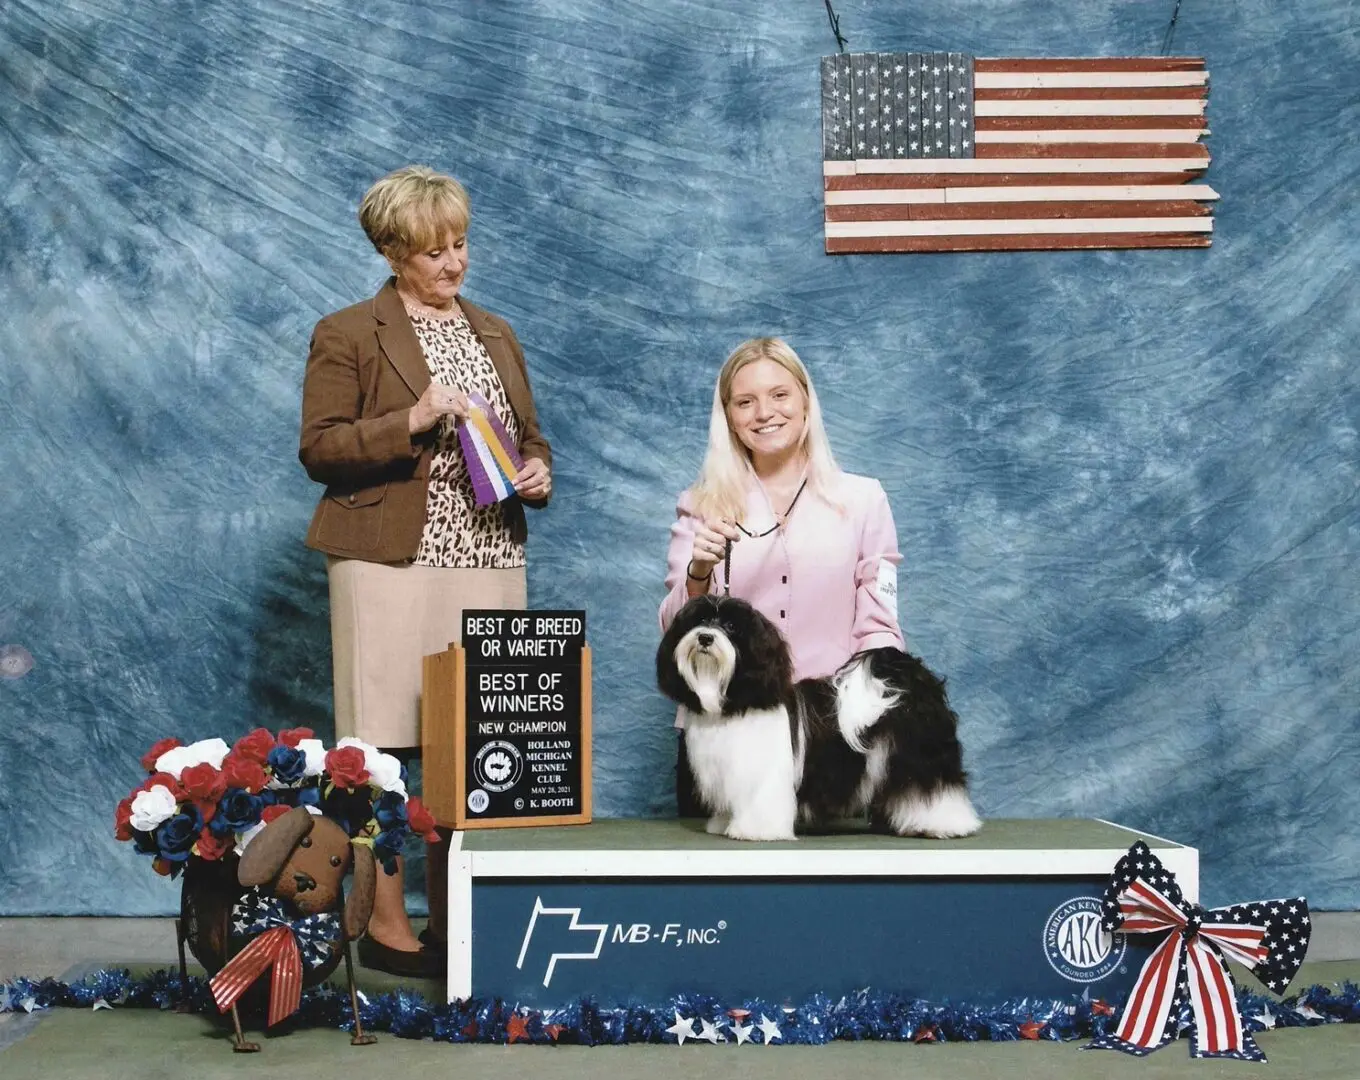 A woman and a Havanese puppy standing next to an American flag.